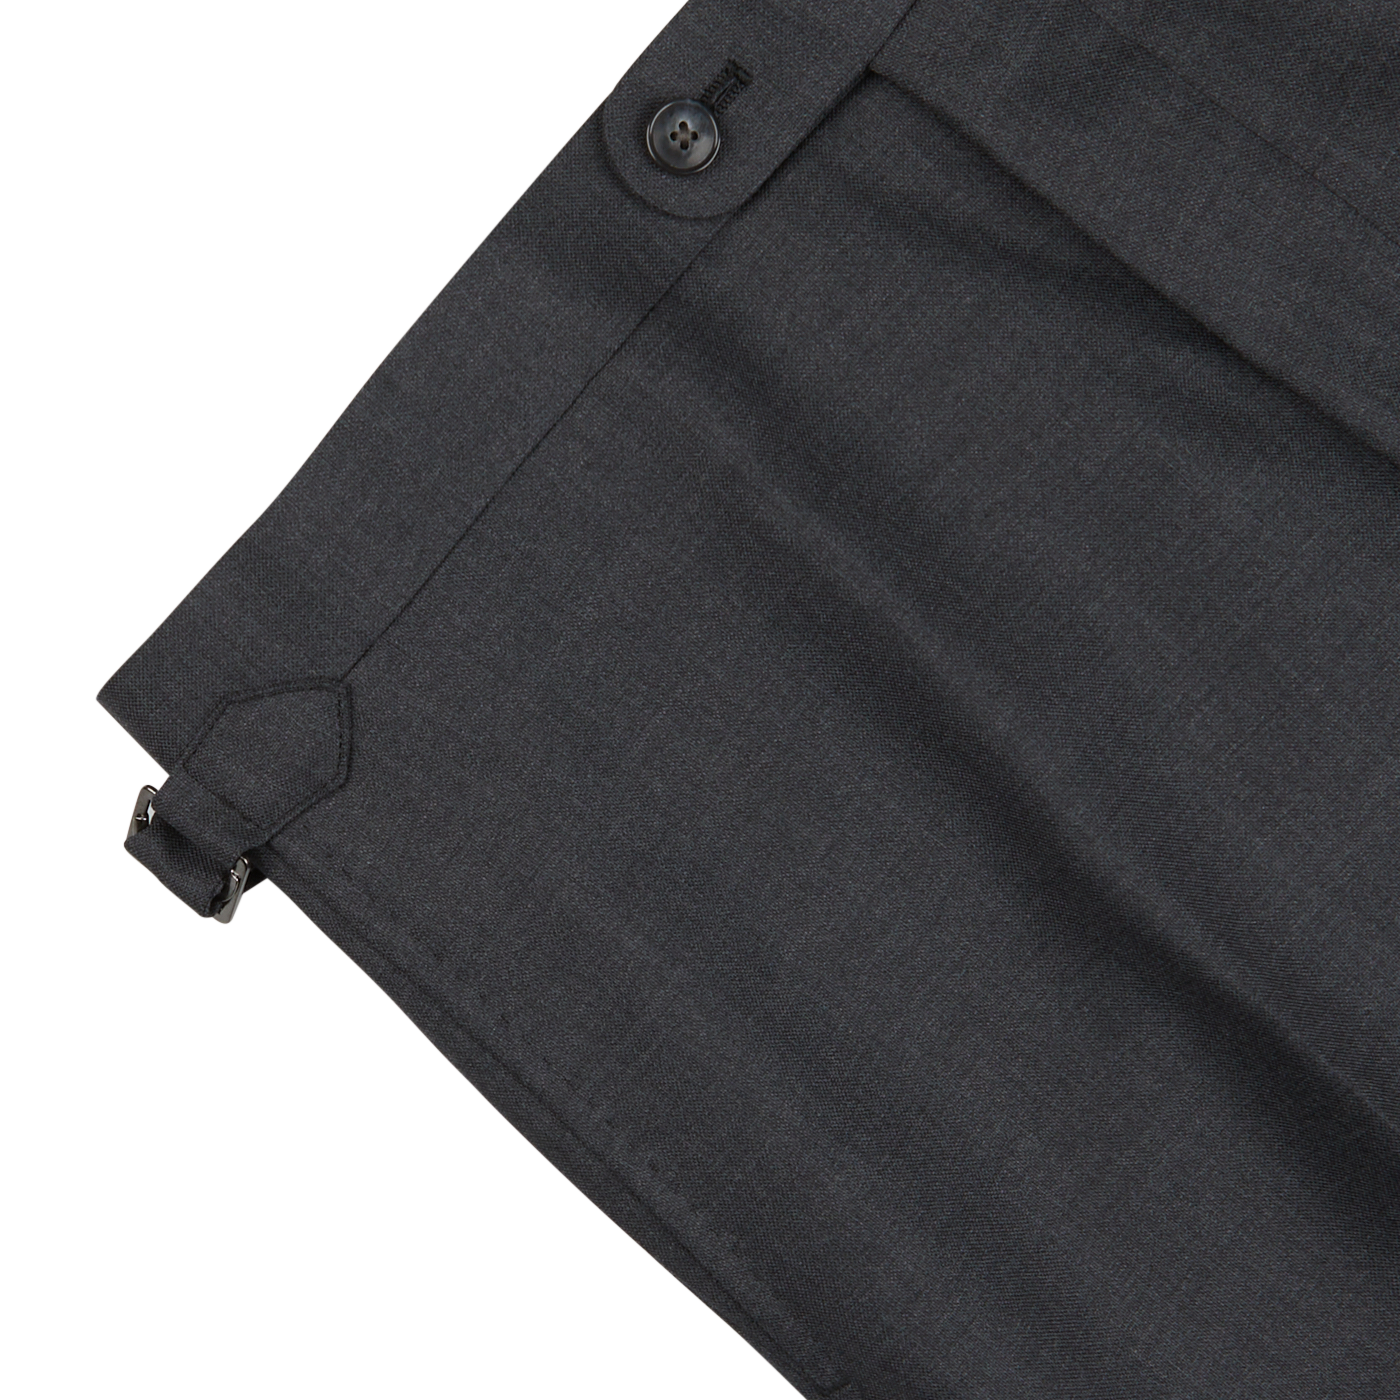 Close-up of Baltzar Sartorial Grey Super 100's Wool Flat Front Suit Trousers with a detailed view of the waistband, featuring a button closure and an adjustable side tab.